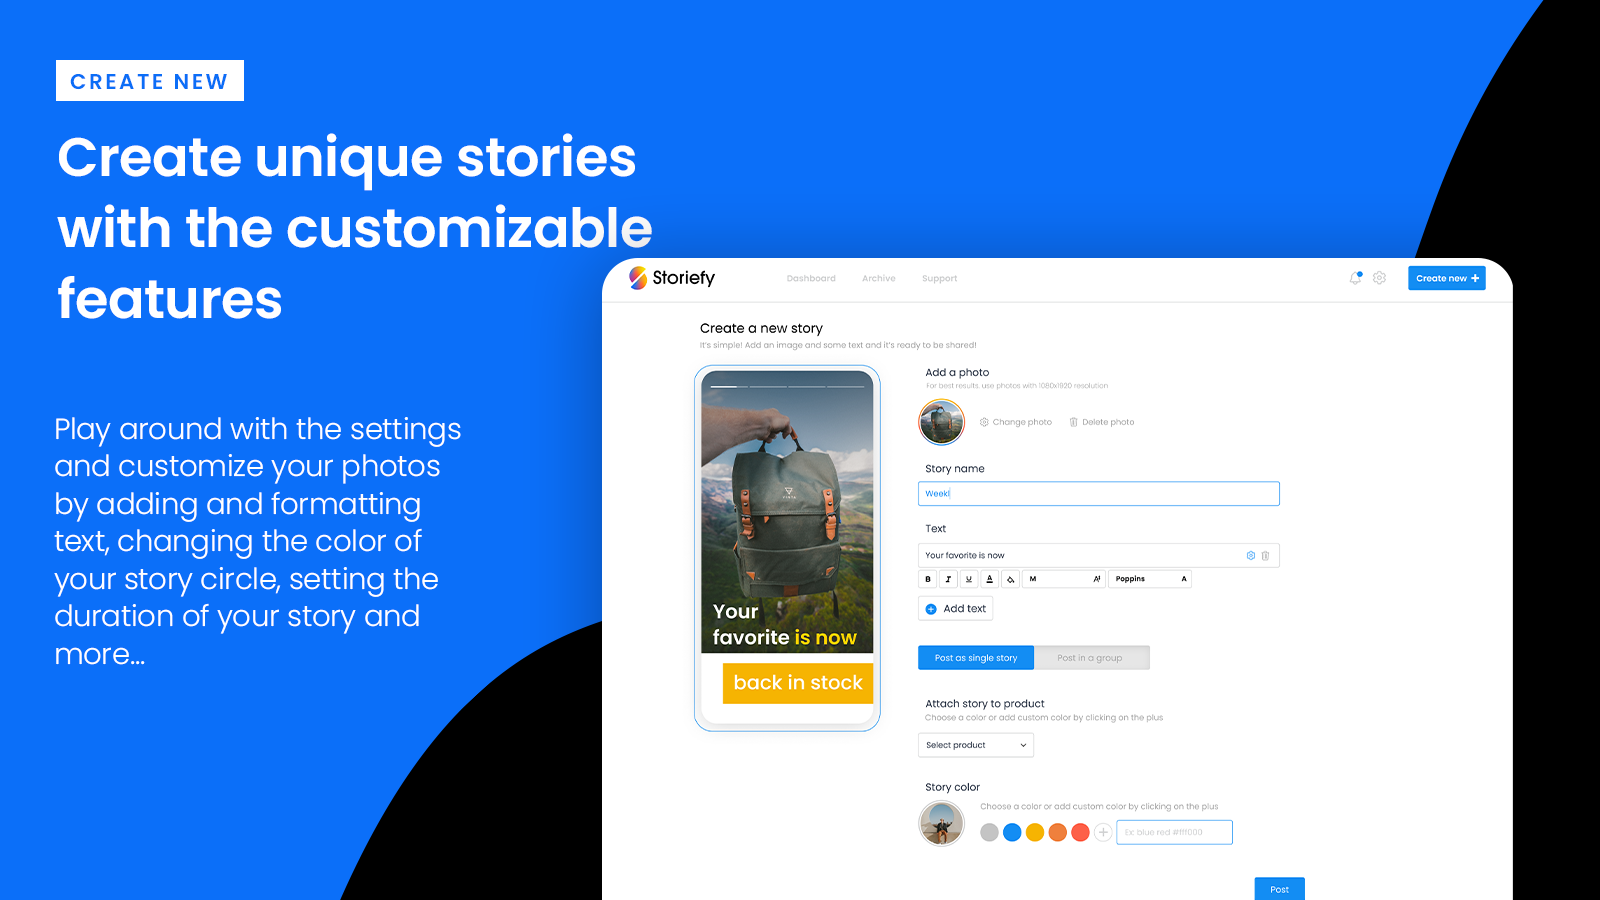 Create unique stories with the customizable features